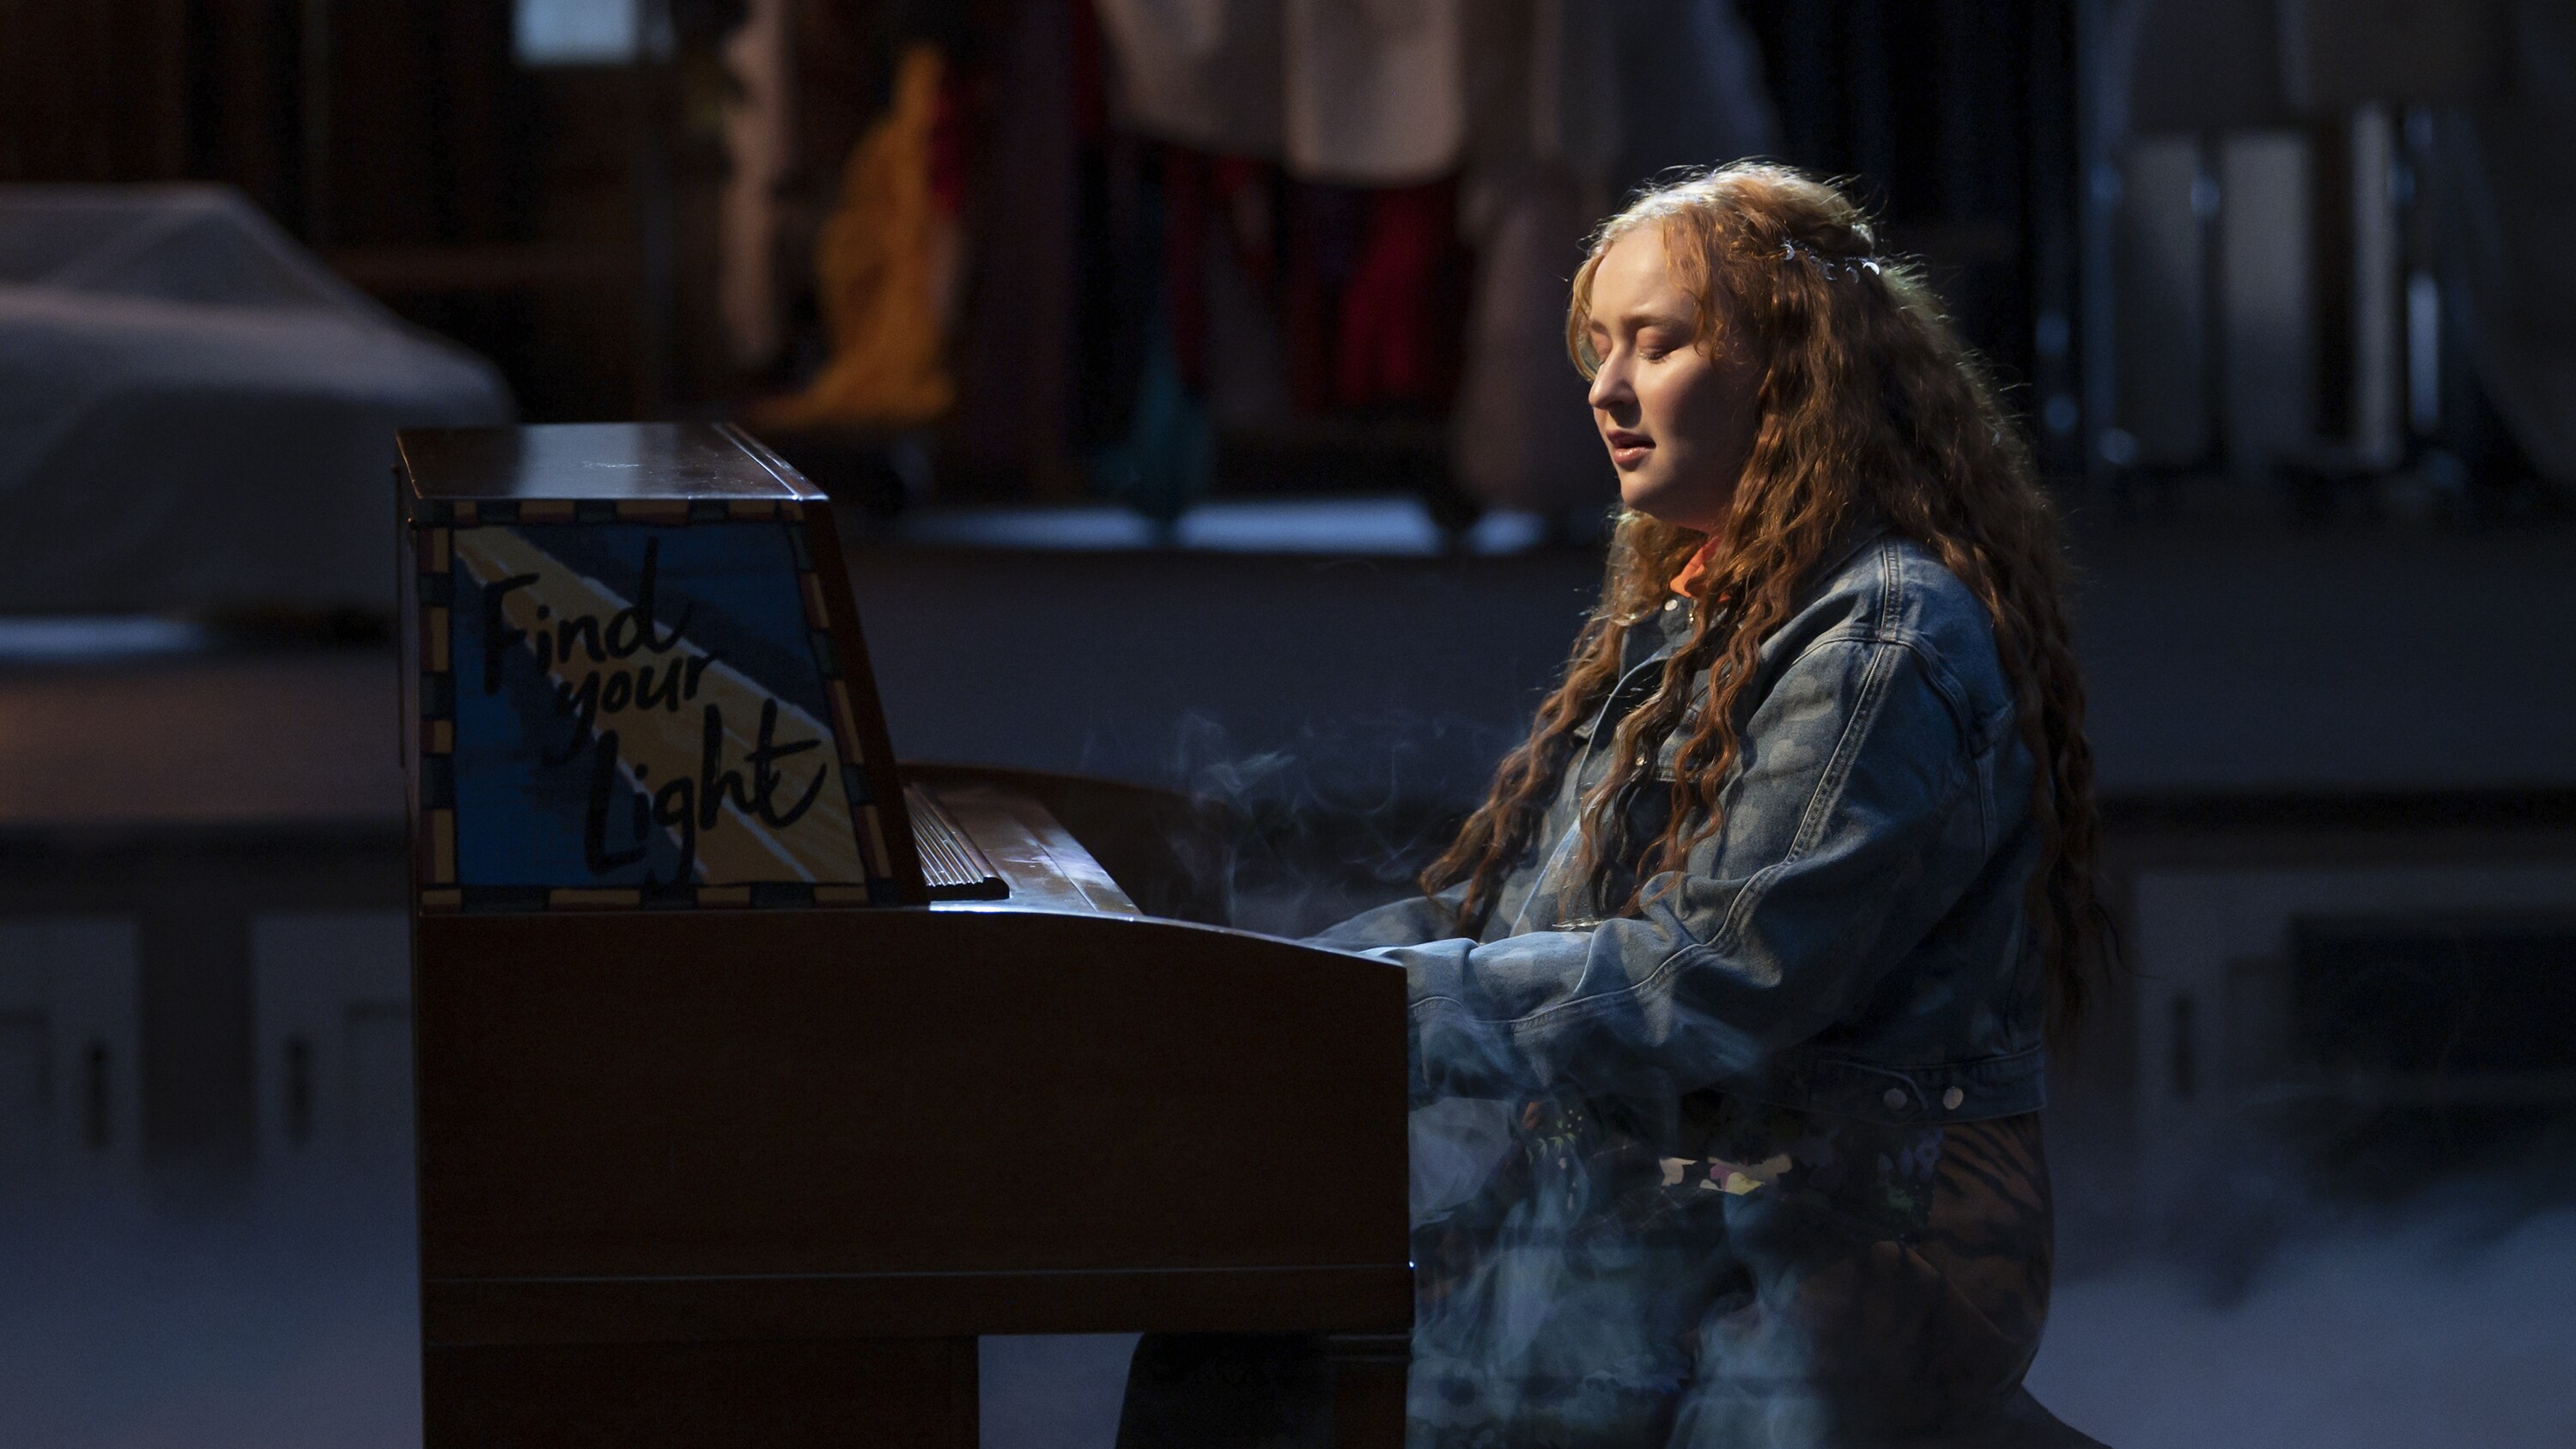 HIGH SCHOOL MUSICAL: THE MUSICAL: THE SERIES - “The Woman in the Woods“ (Disney/Anne Marie Fox) JULIA LESTER